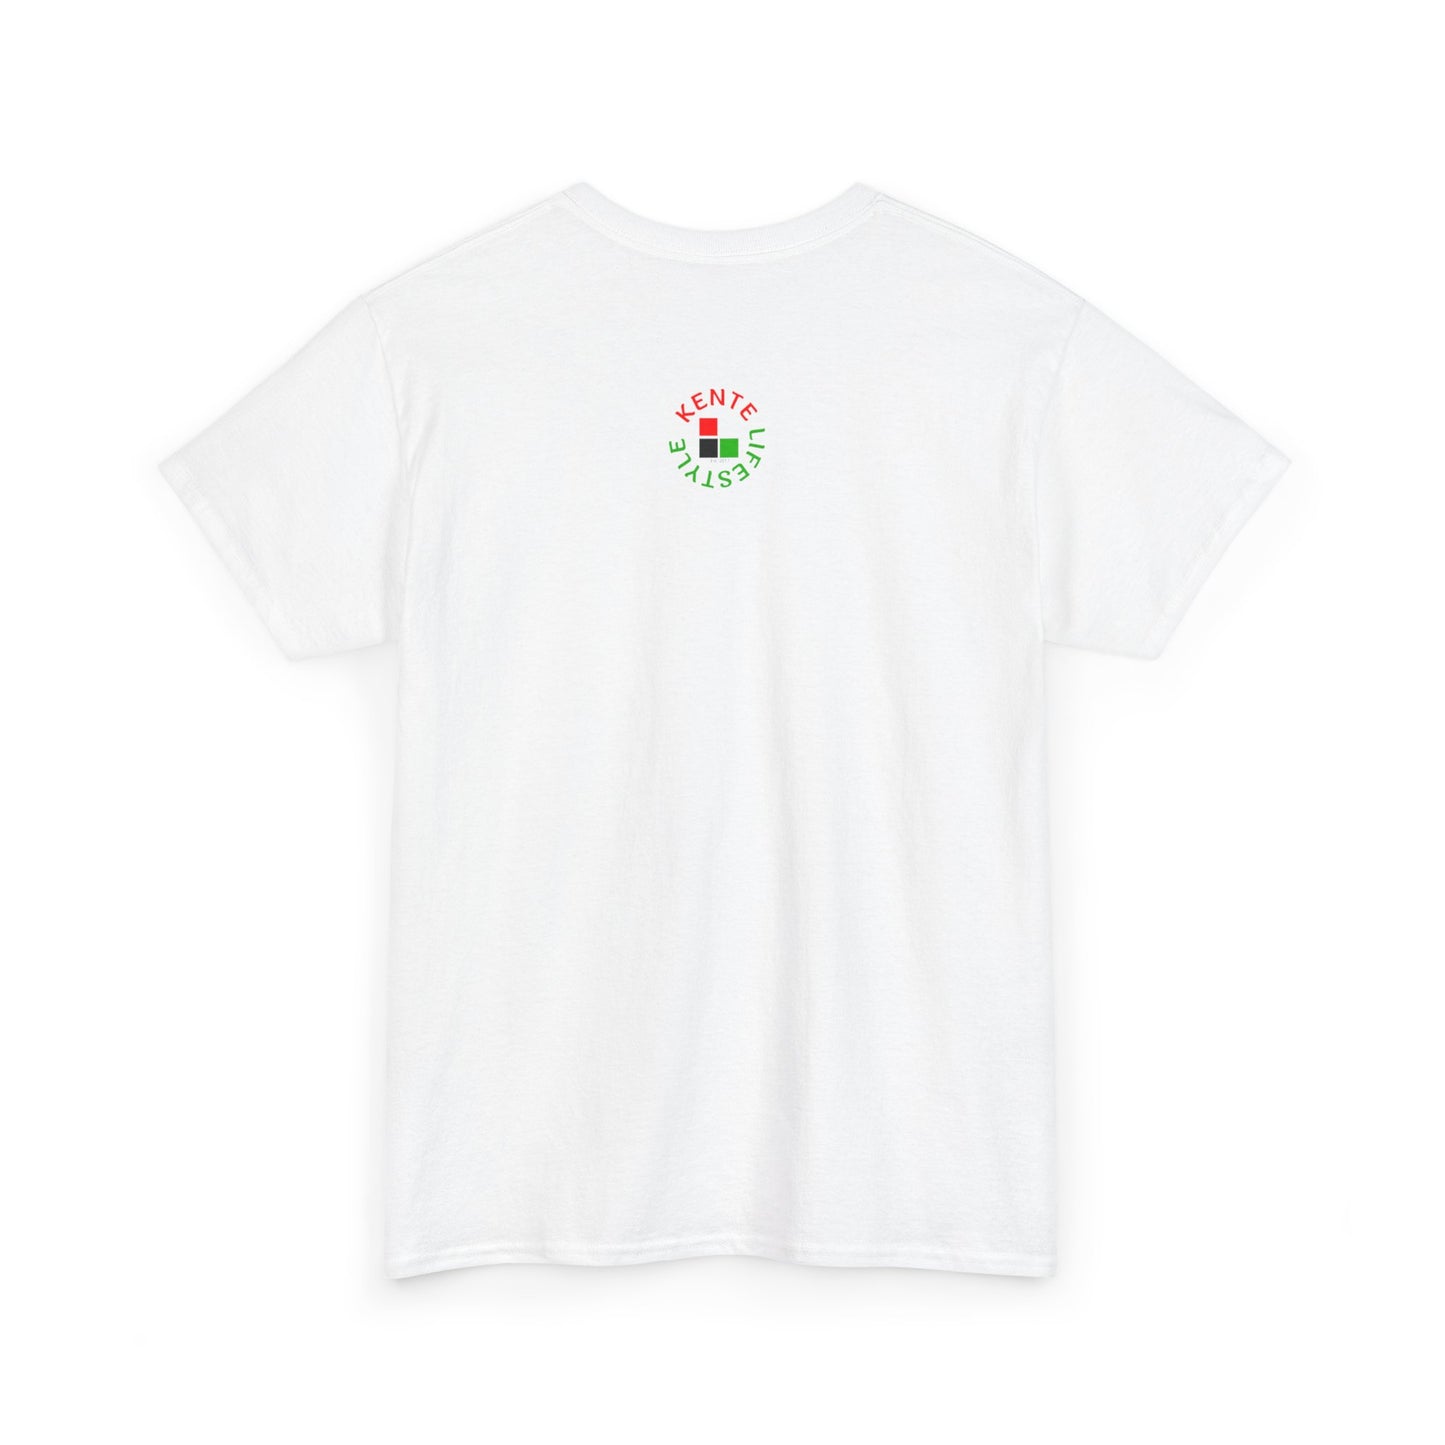 "The Revolution will be Streamed" - Unisex Heavy Cotton T-shirt